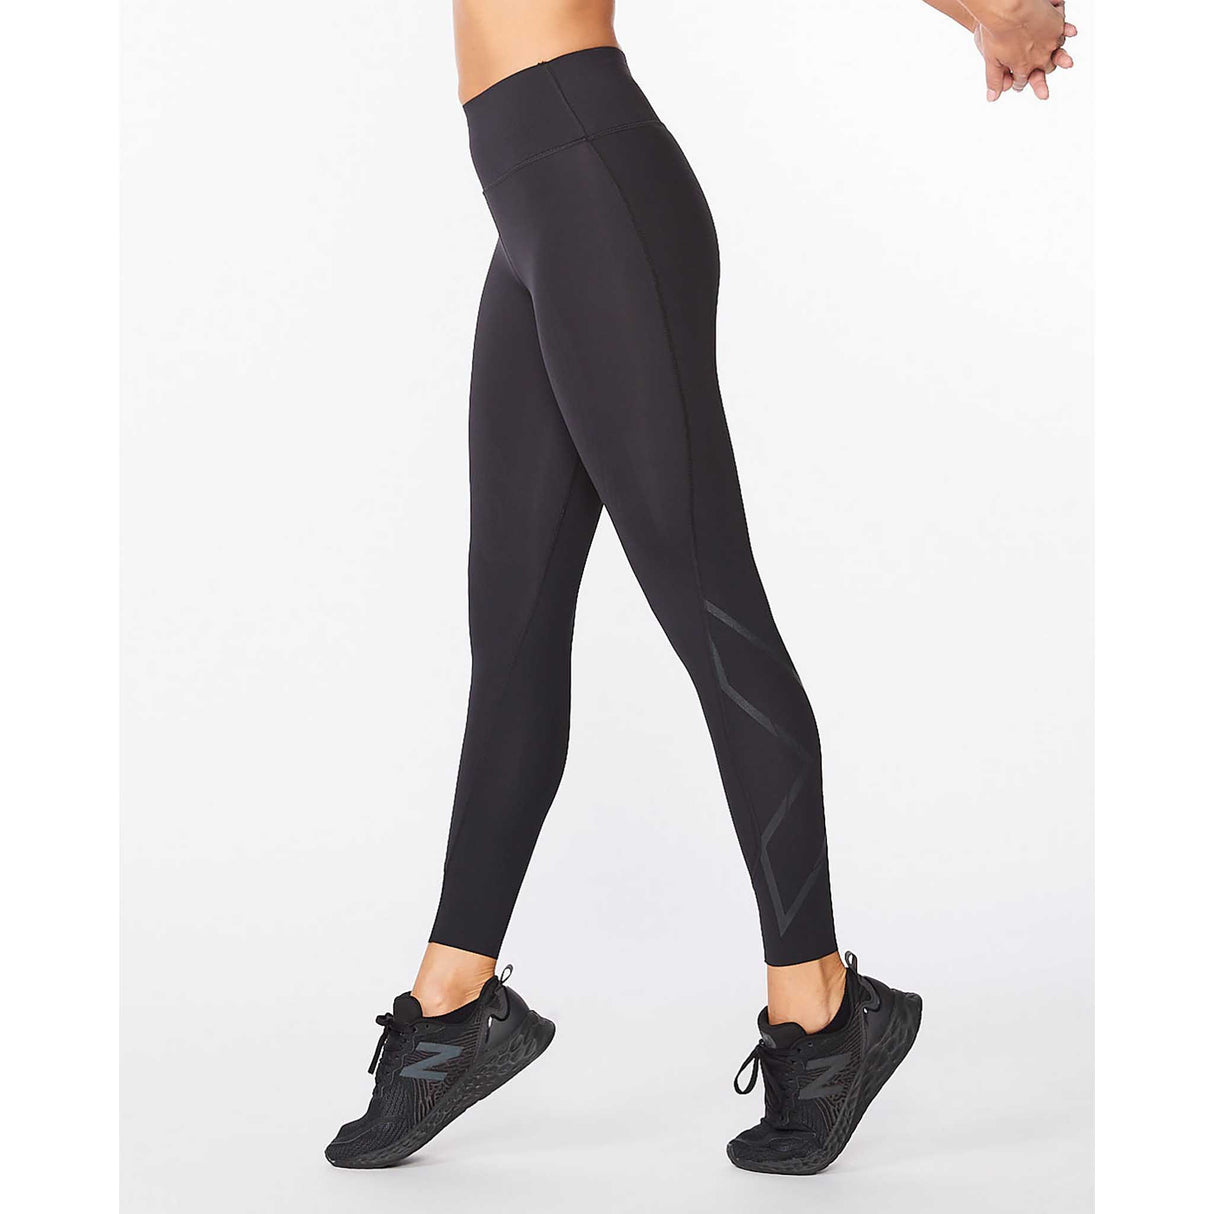 2XU Force Mid-Rise Compression Tights femme lateral 2- noir